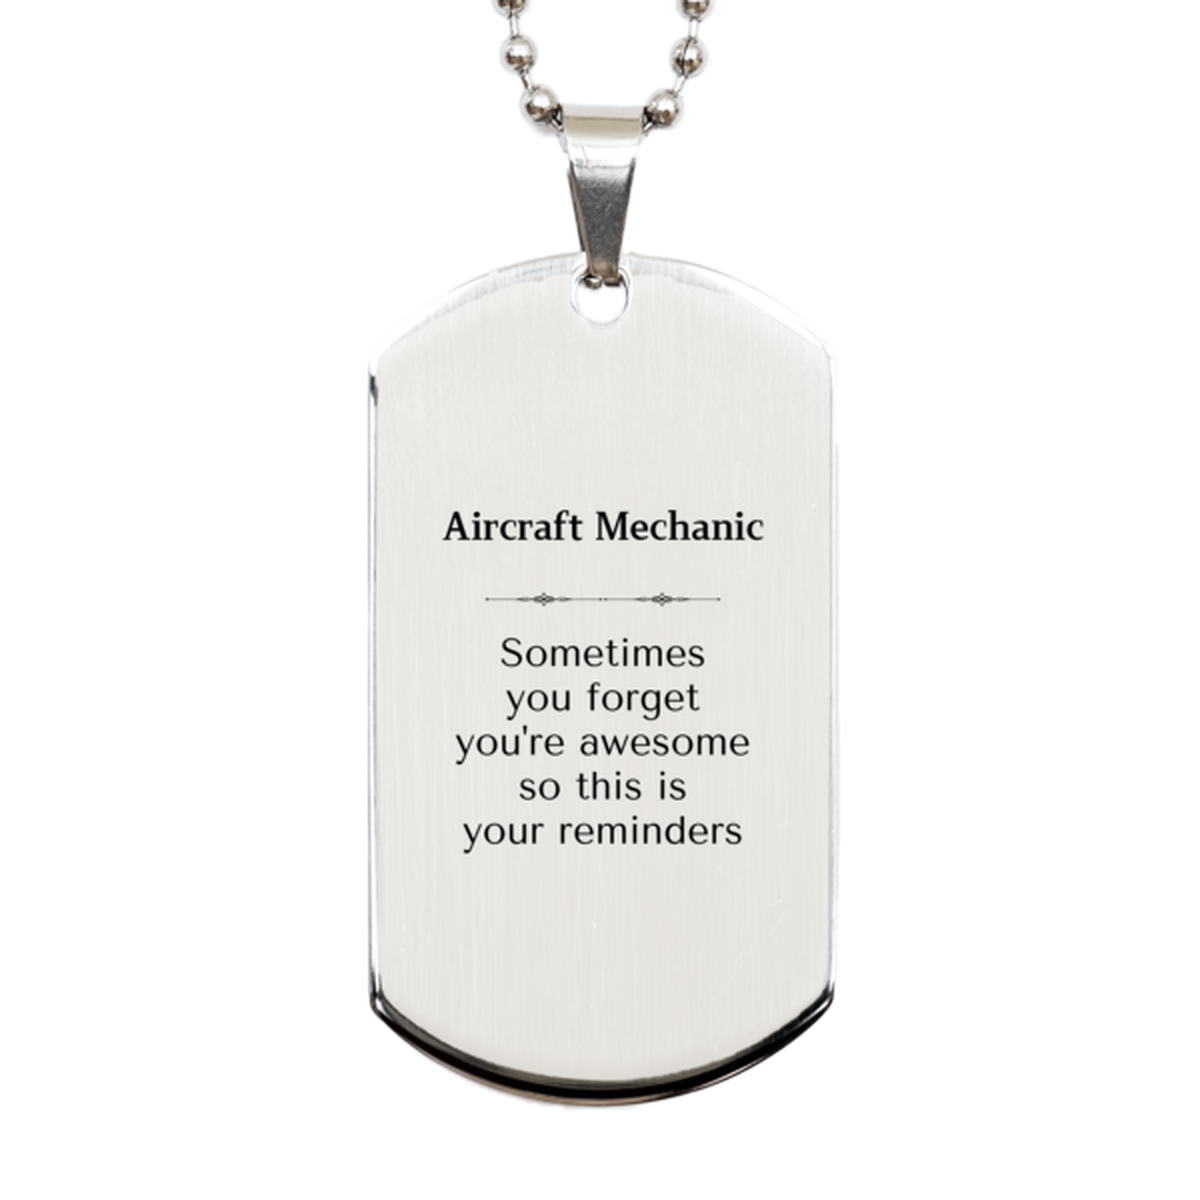 Sentimental Aircraft Mechanic Silver Dog Tag, Aircraft Mechanic Sometimes you forget you're awesome so this is your reminders, Graduation Christmas Birthday Gifts for Aircraft Mechanic, Men, Women, Coworkers